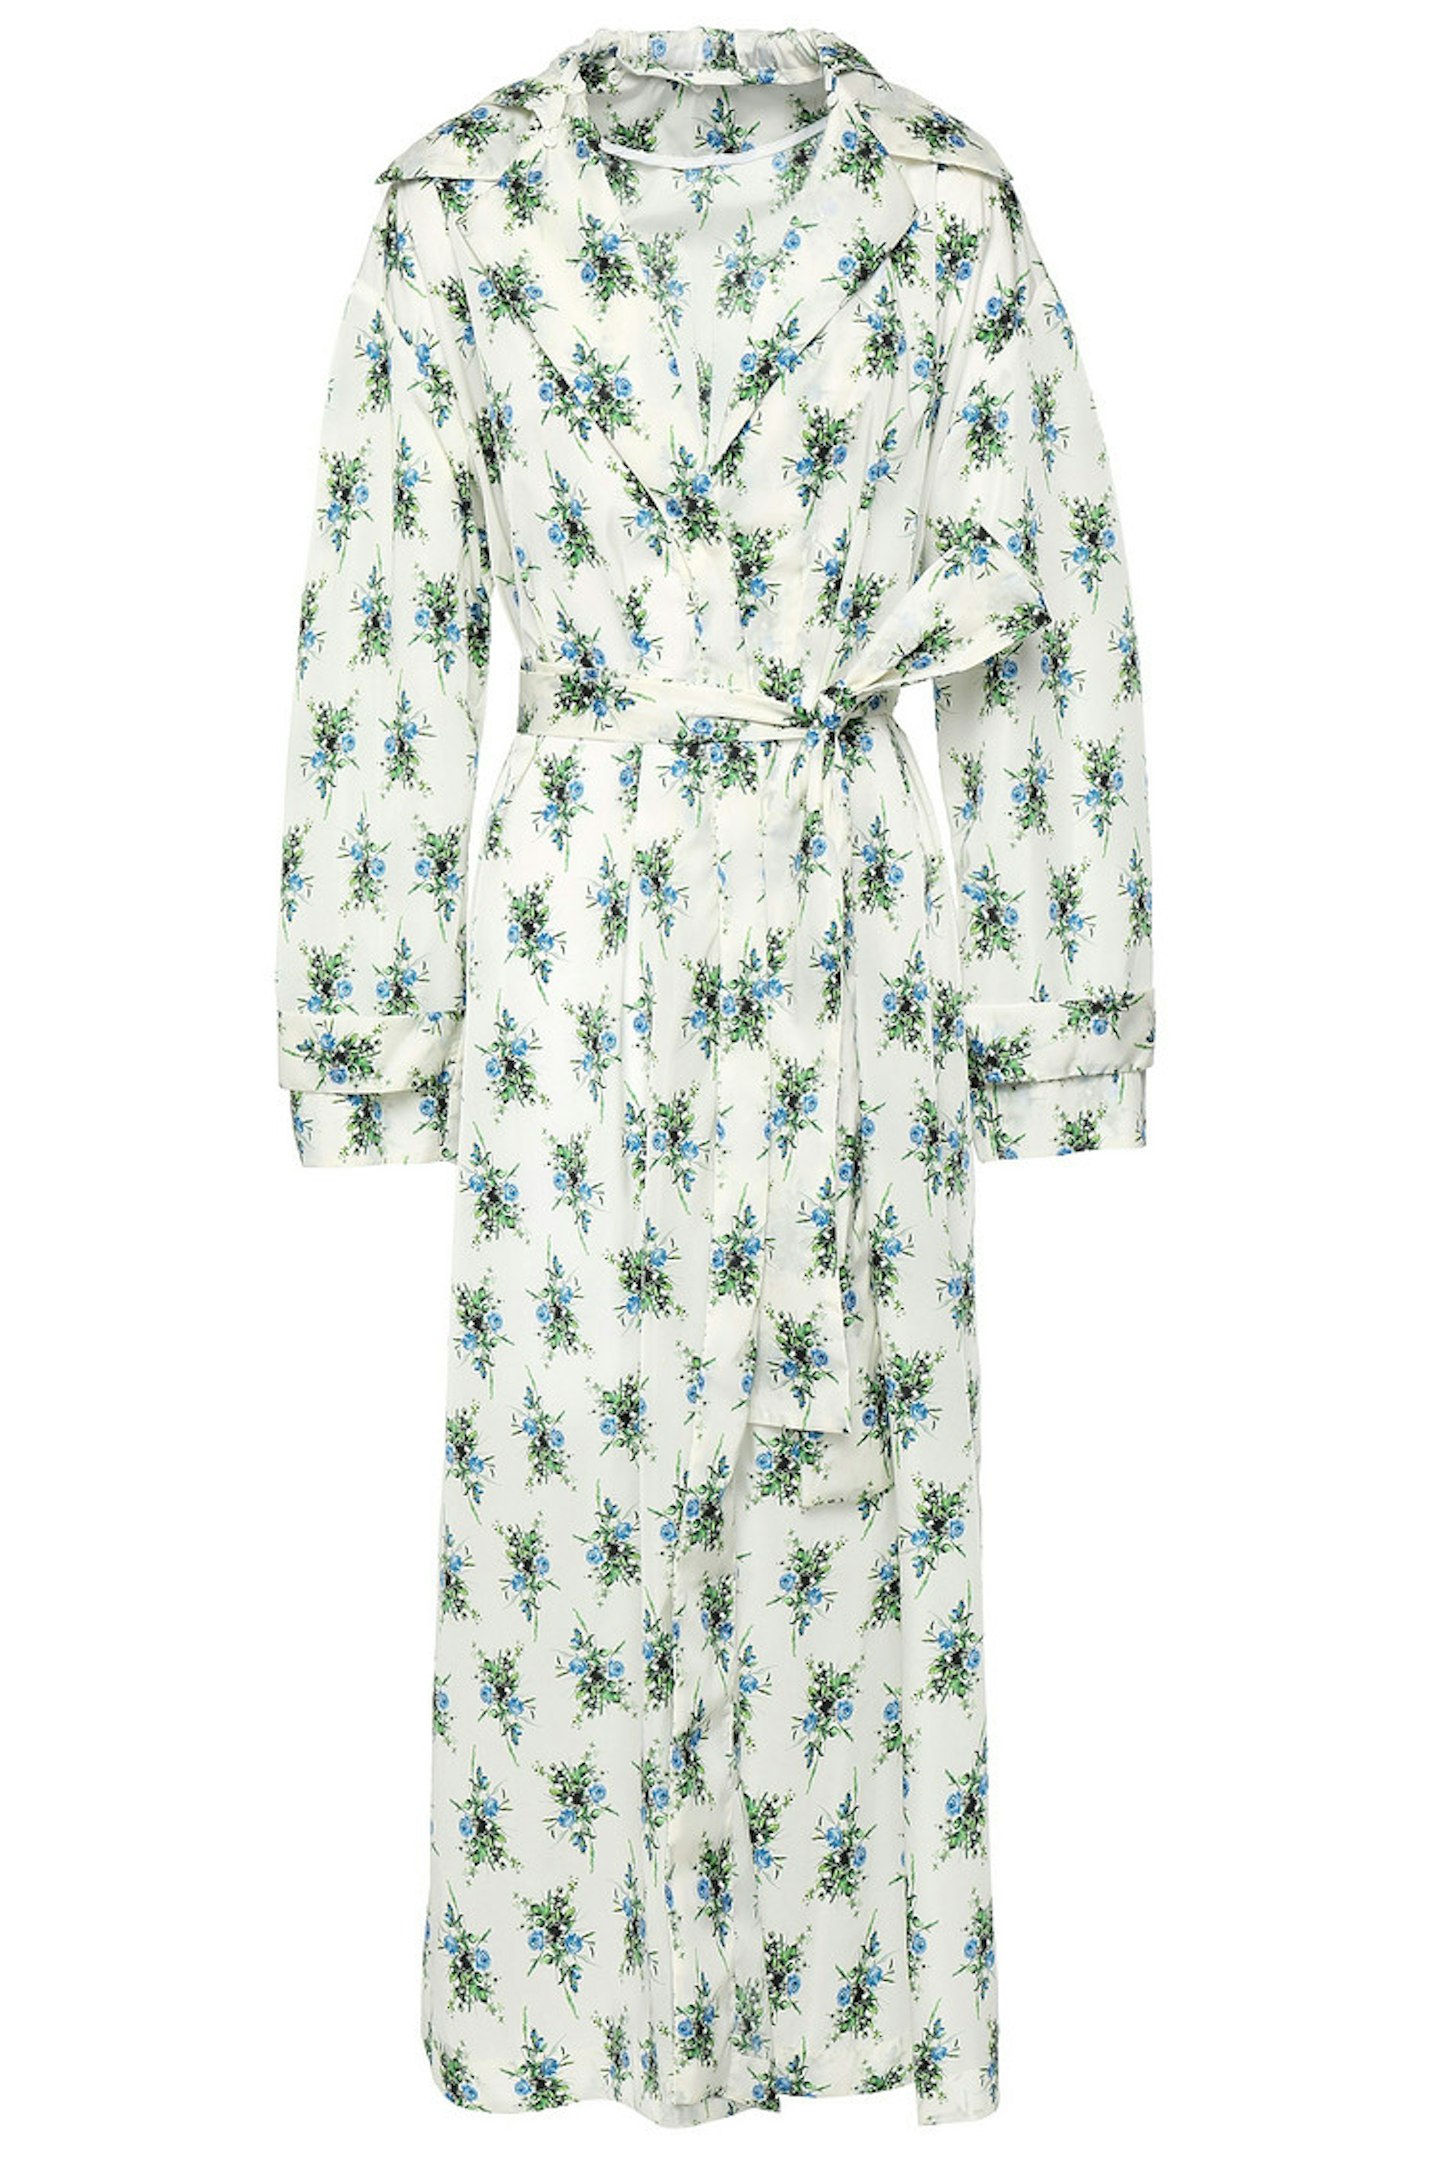 Emilia Wickstead, Wilmer belted floral-print shell hooded jacket, WAS £1206, NOW £298